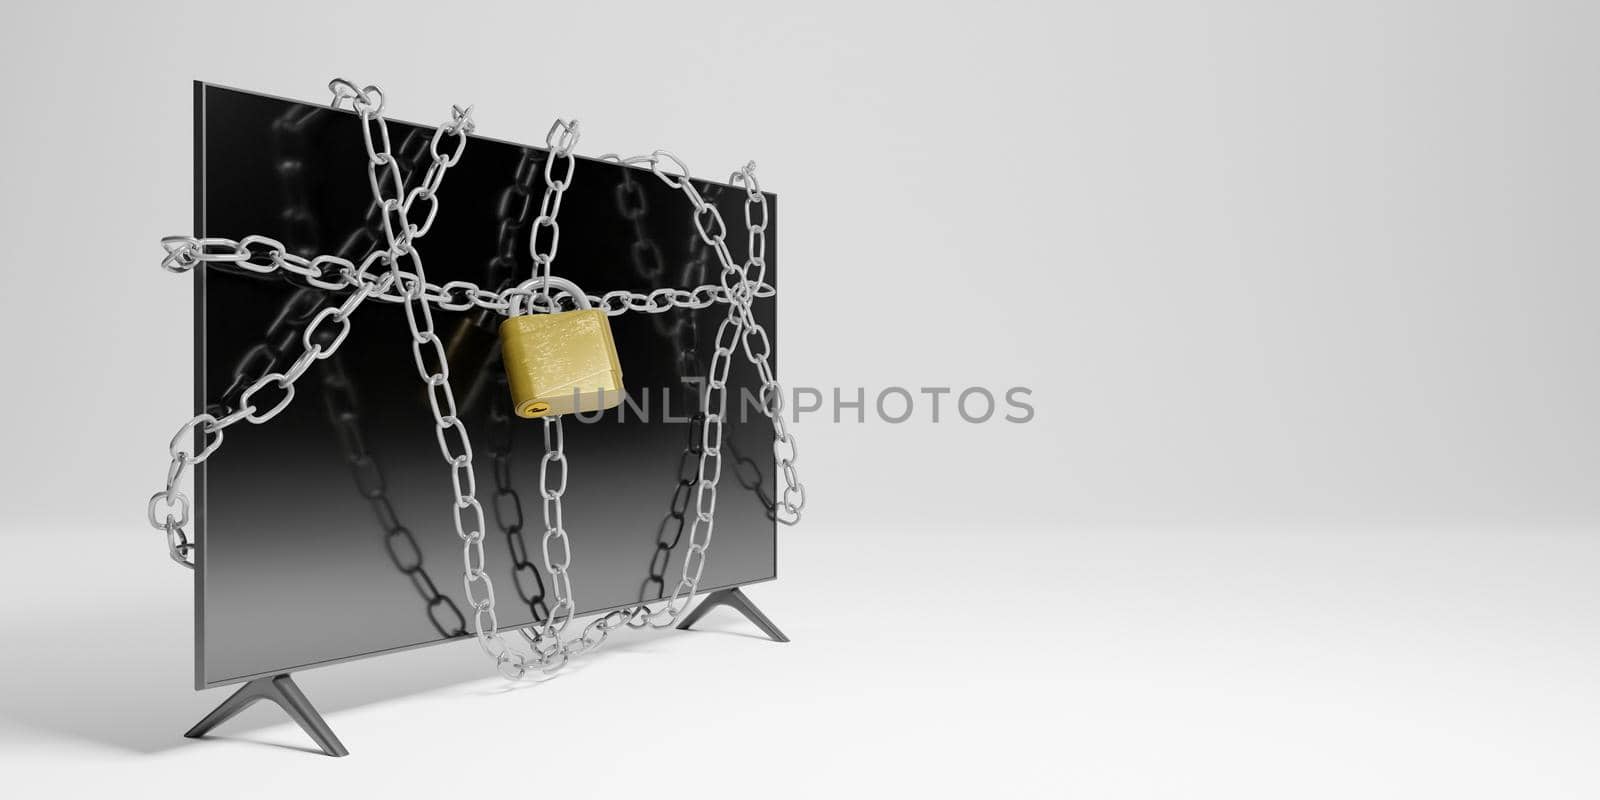 Modern flat television with chains tangled in it by asolano